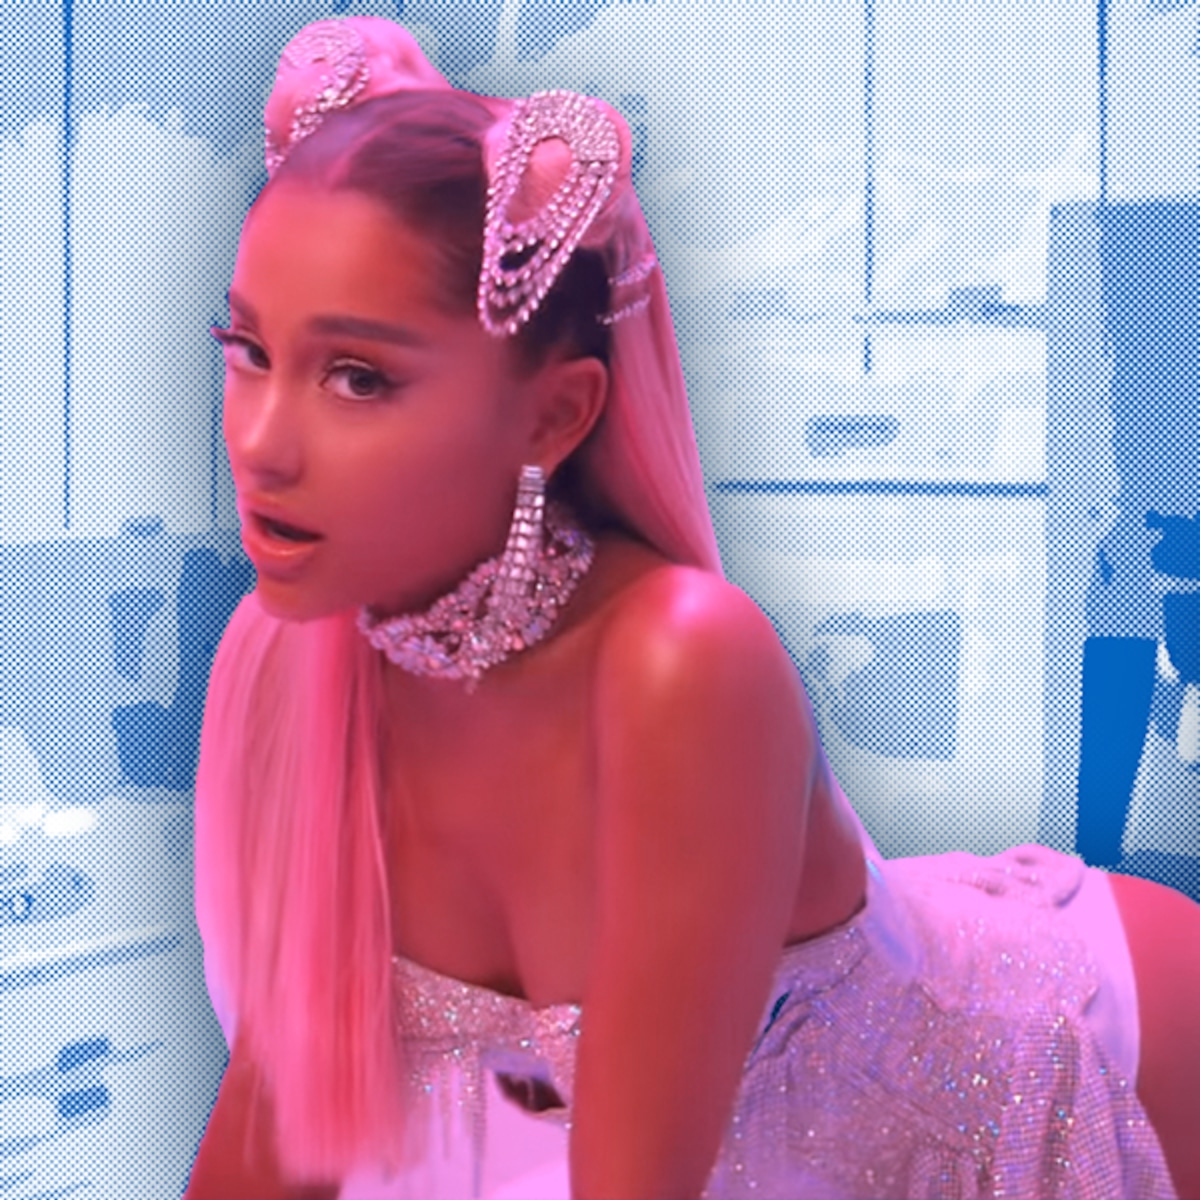 dans binær Mere end noget andet Here's Exactly How Ariana Grande's "7 Rings" Was Made - E! Online